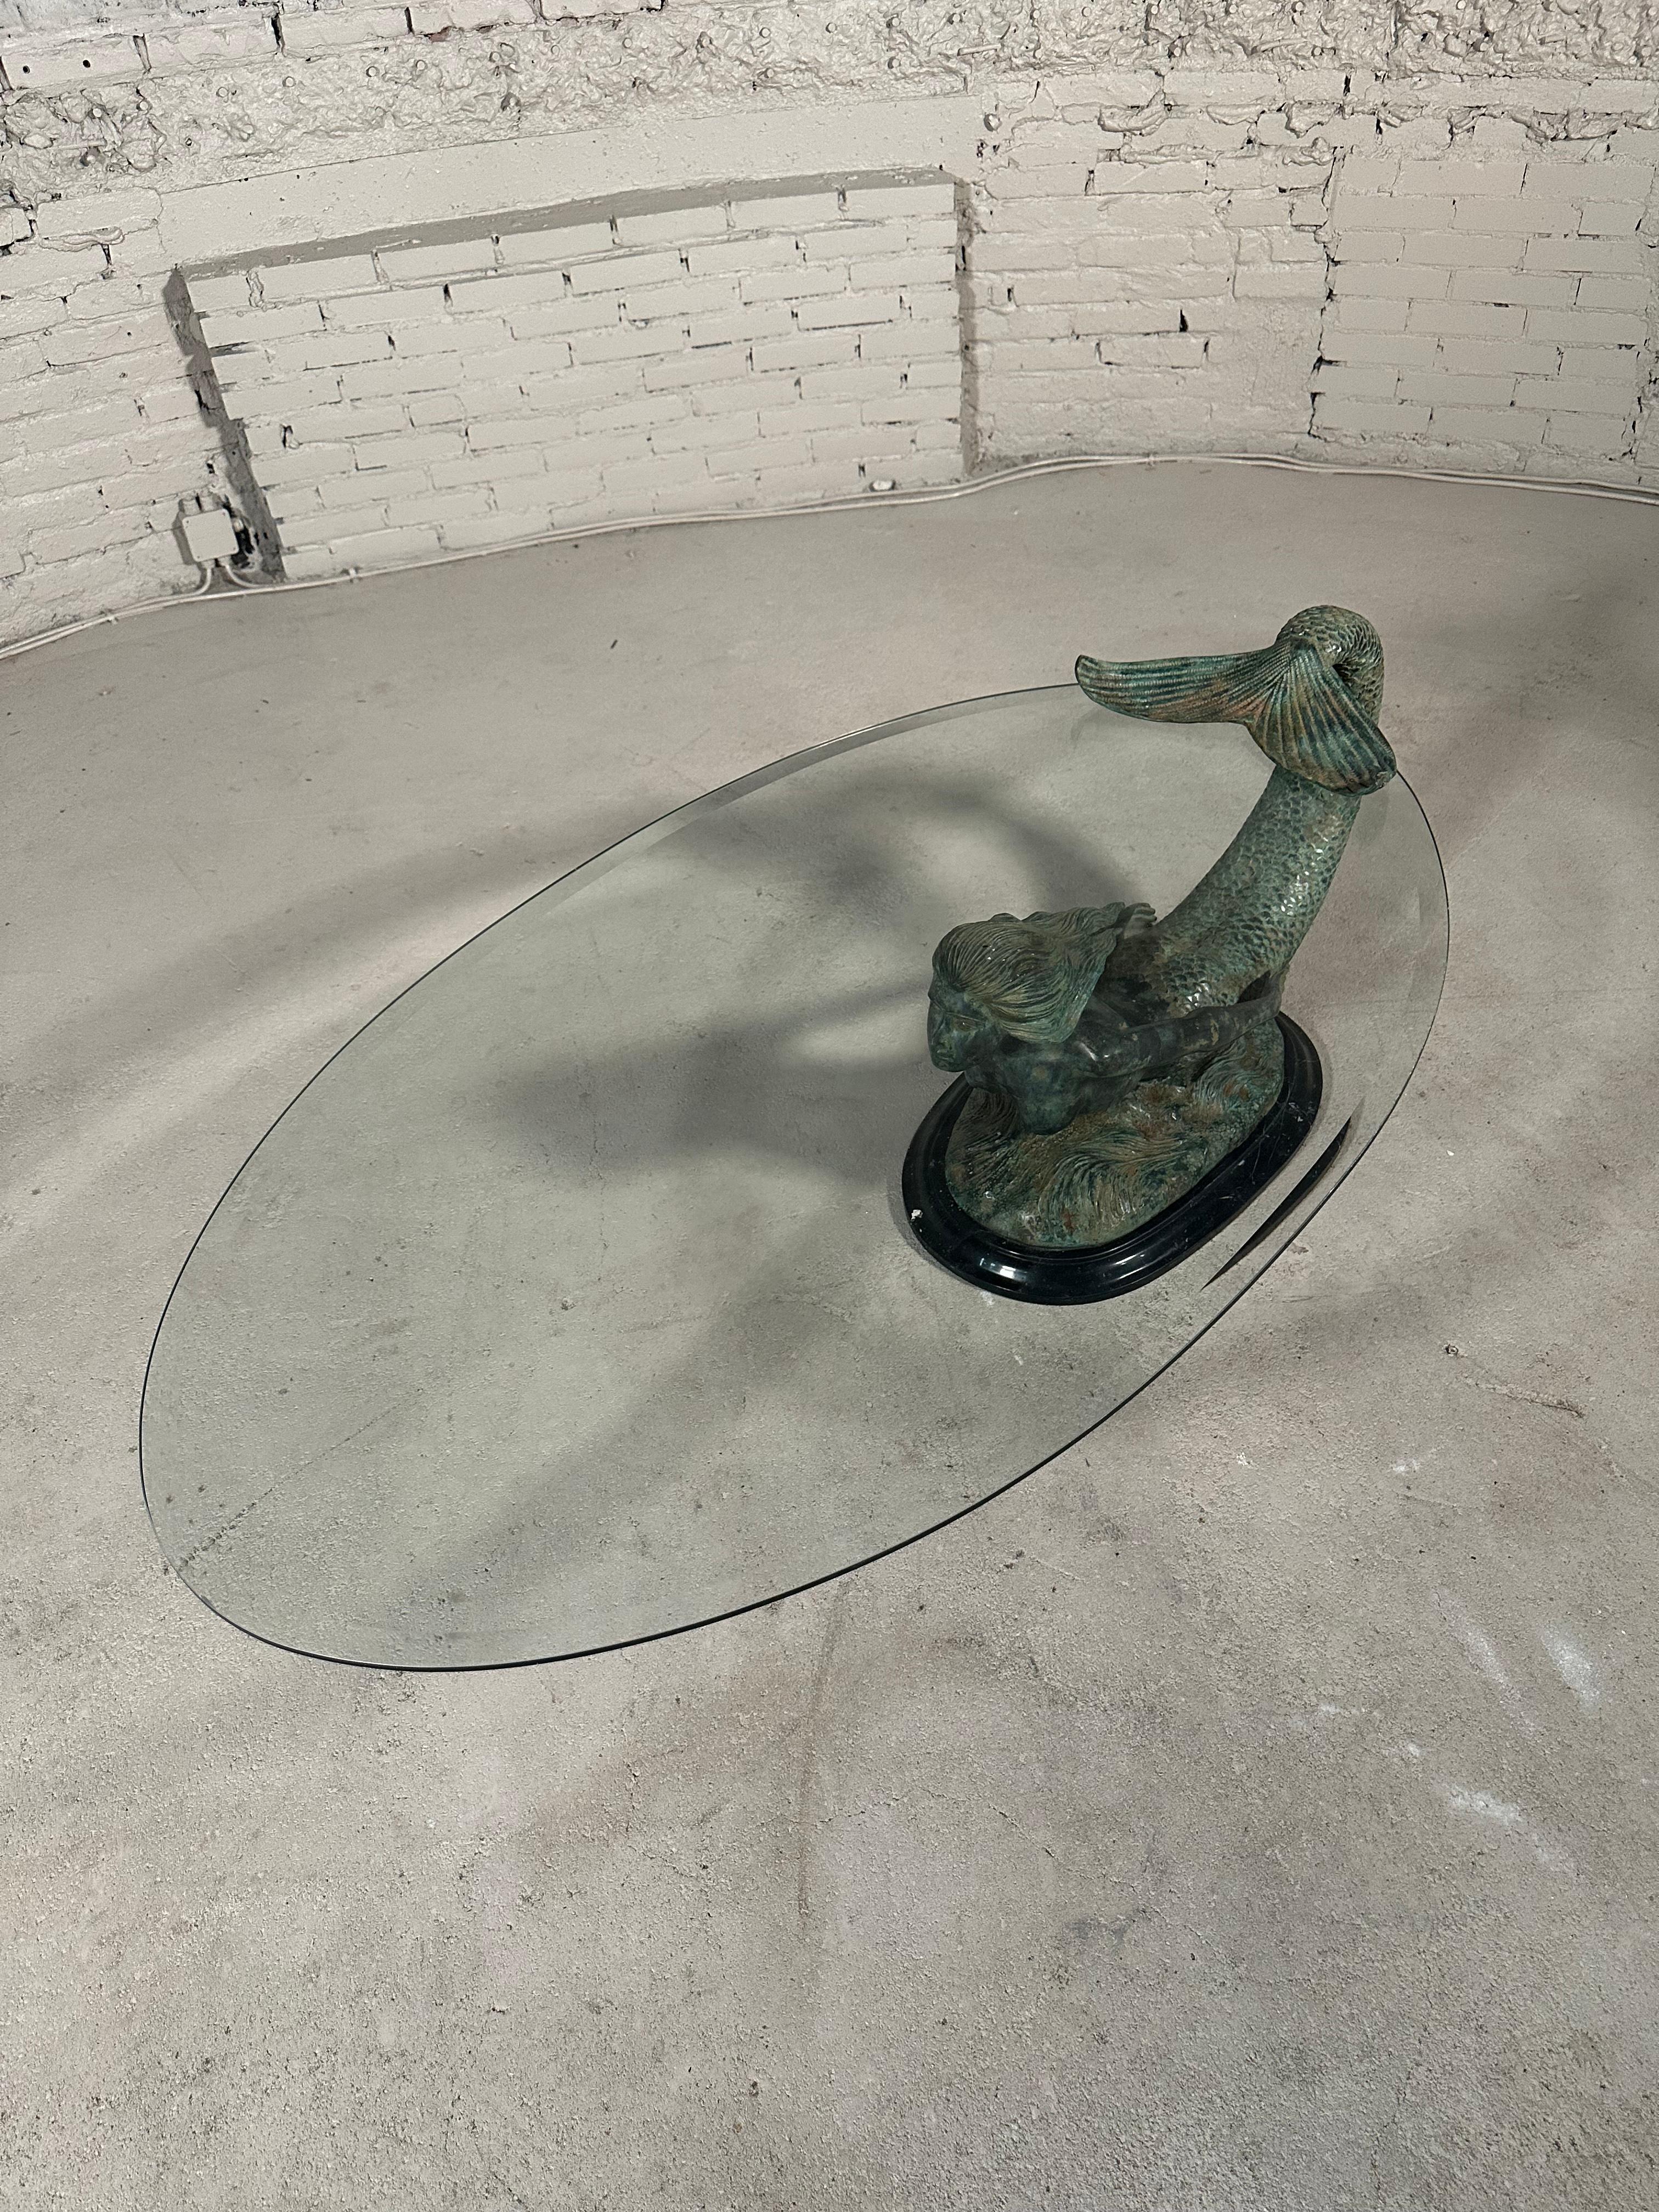 Bronze Mermaid Coffee Table, circa 1970's. 

This elegant coffee table features a faceted glass plate resting upon a sturdy mermaid bronze chassis with a stunning green patina. A massive marble plateau serves as the base for the mermaid sculpture.